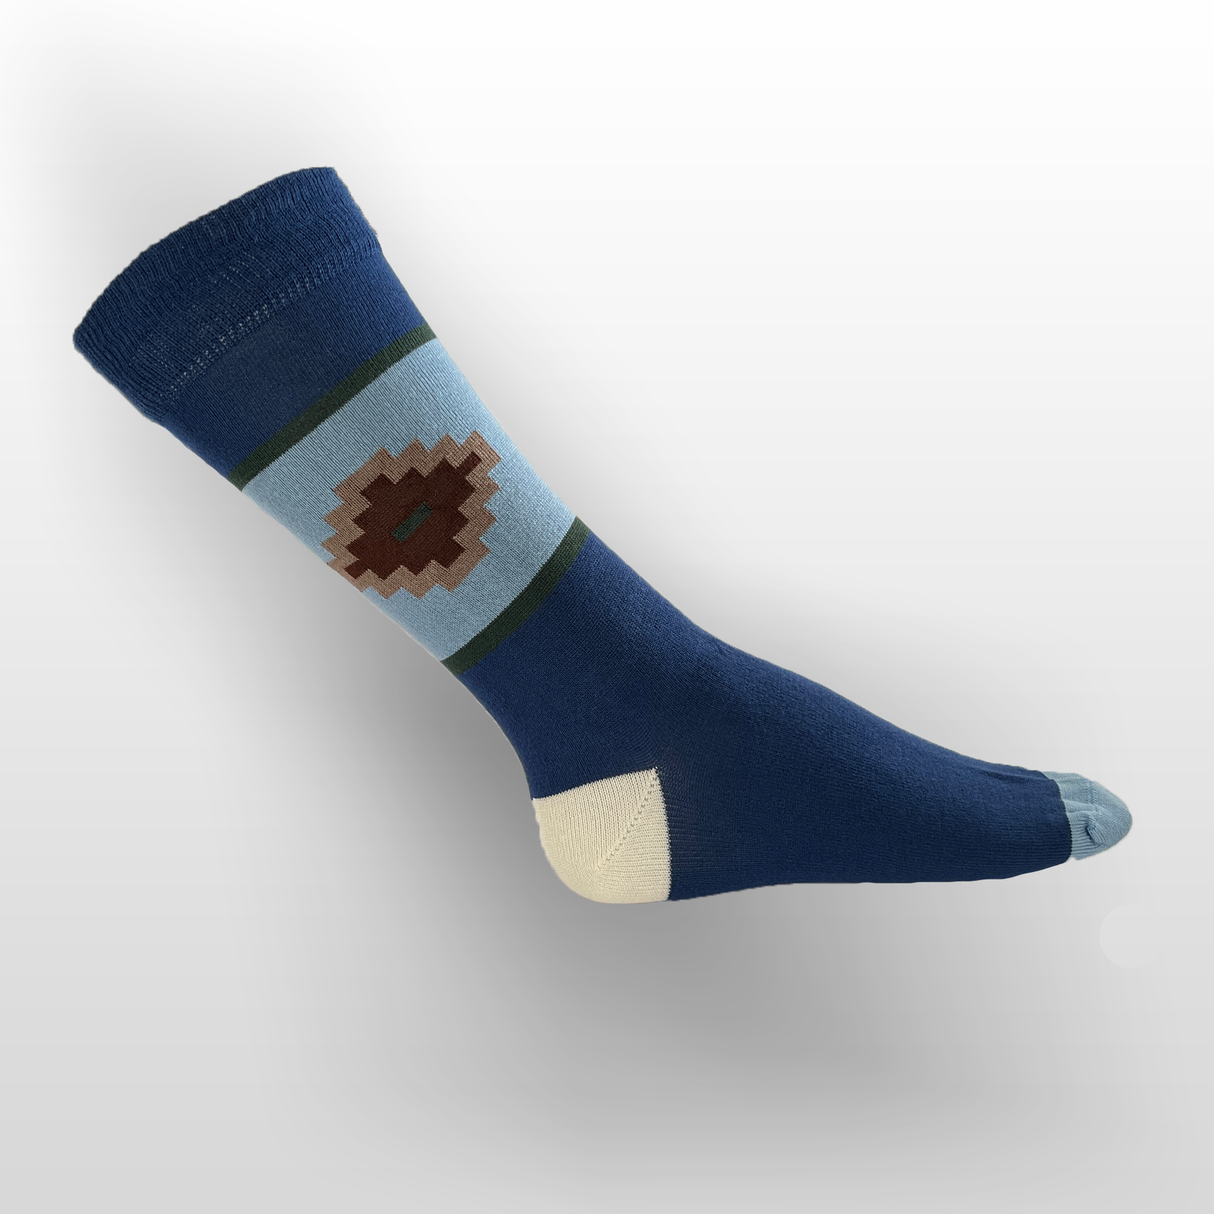 House of Tweed Pure Luxury Mens Bamboo Socks | Dark Blue 3 Pairs - Premium clothing from House of Tweed - Just $9.99! Shop now at Warwickshire Clothing